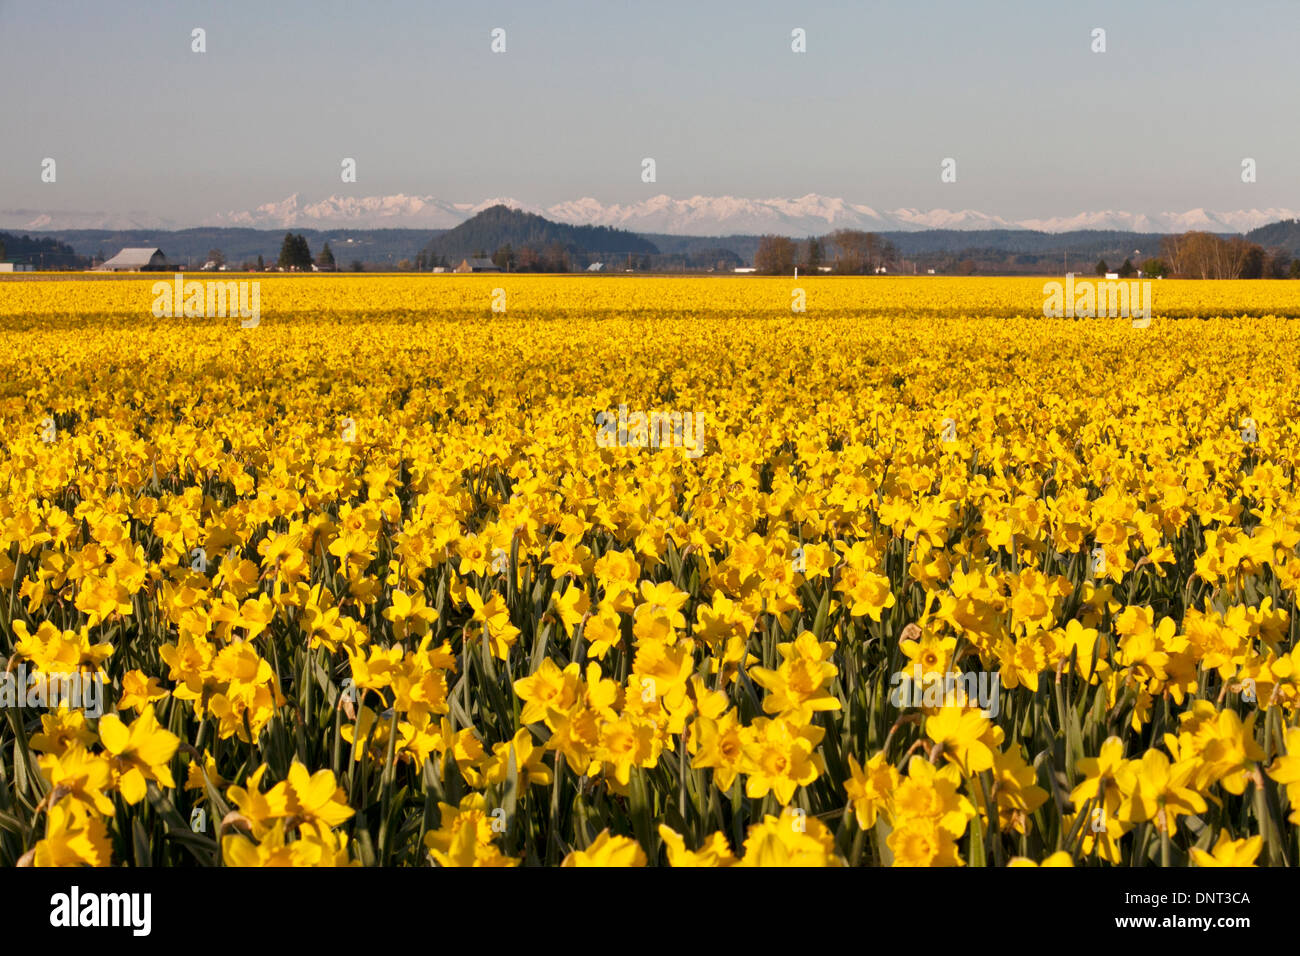 Field of daffodils in bloom during the Skagit Valley Tulip Festival, Mount Vernon, Washington. Stock Photo